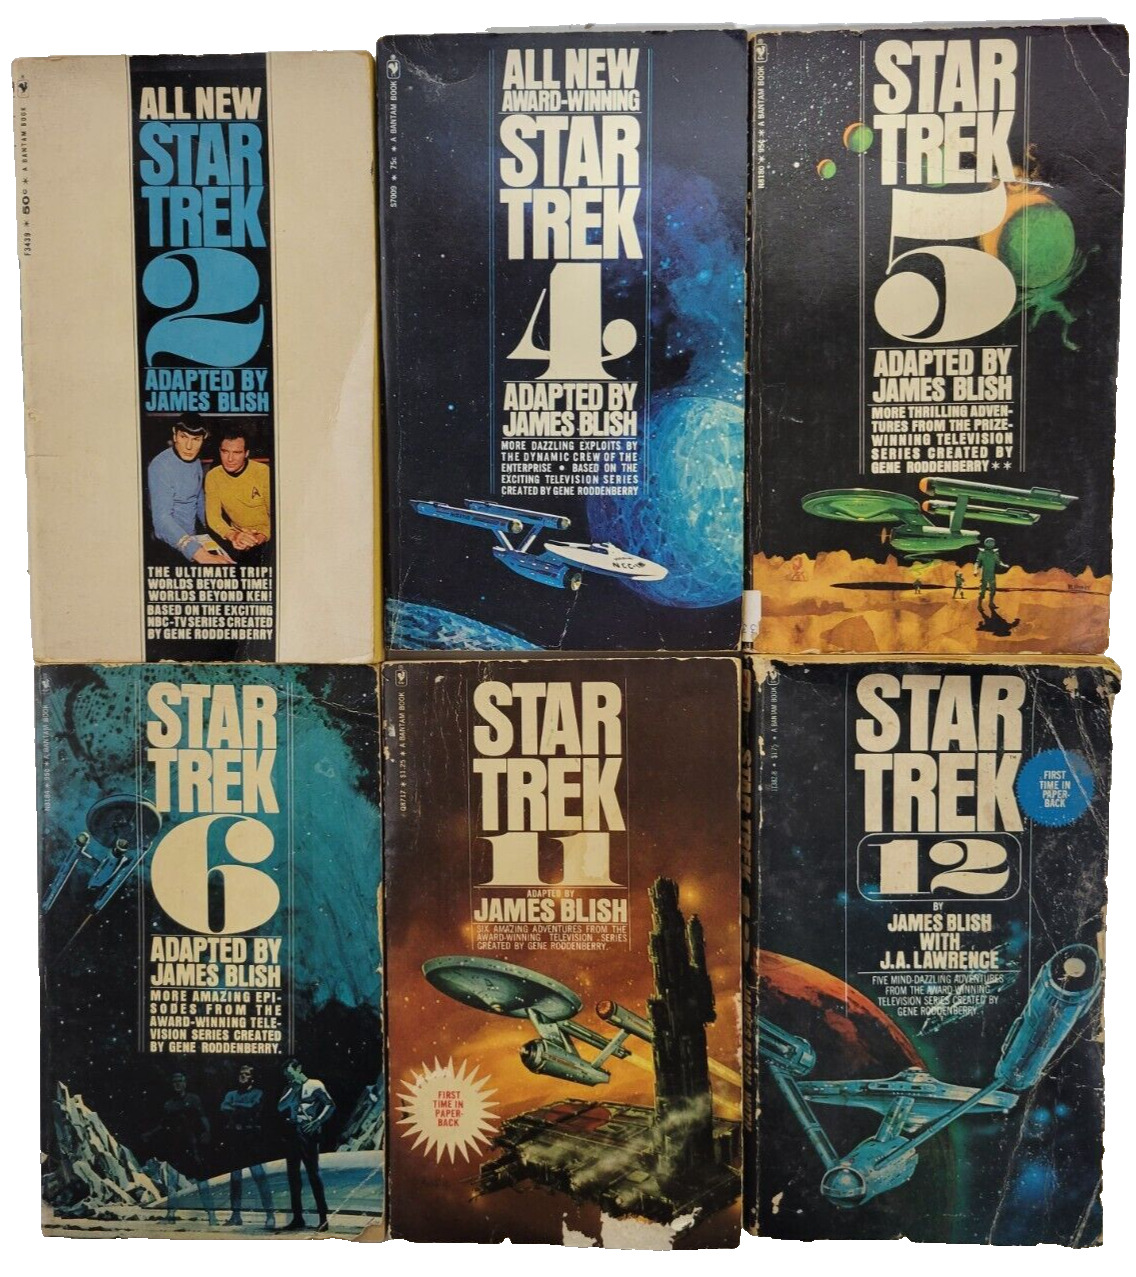 LOT OF 6 STAR TREK 2 4 5 6 11 12 Sci-fi Paperback Book Adapted by James Blish